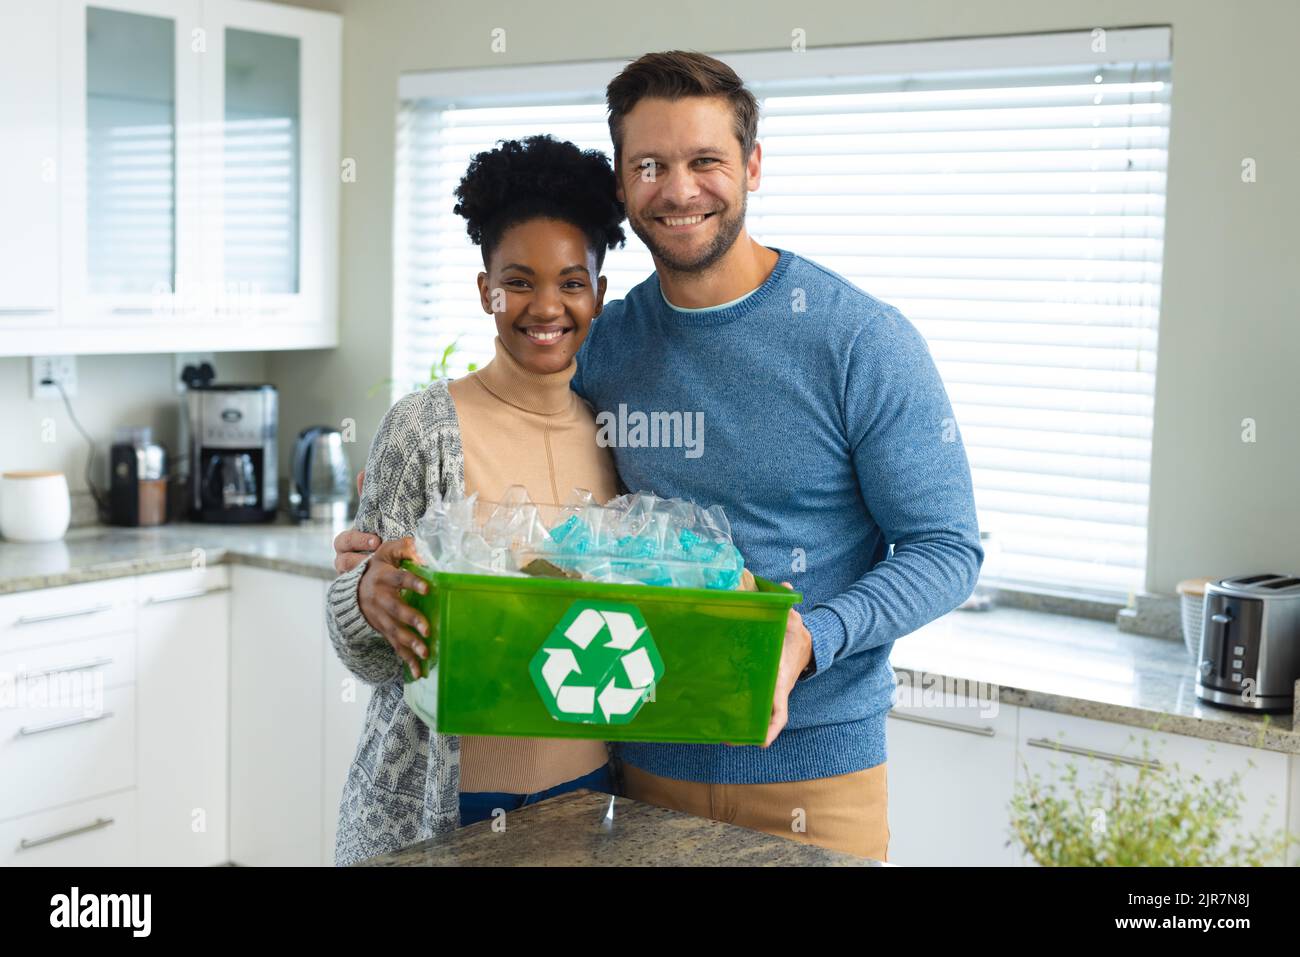 Image of happy diverse couple with recycling bin Stock Photo